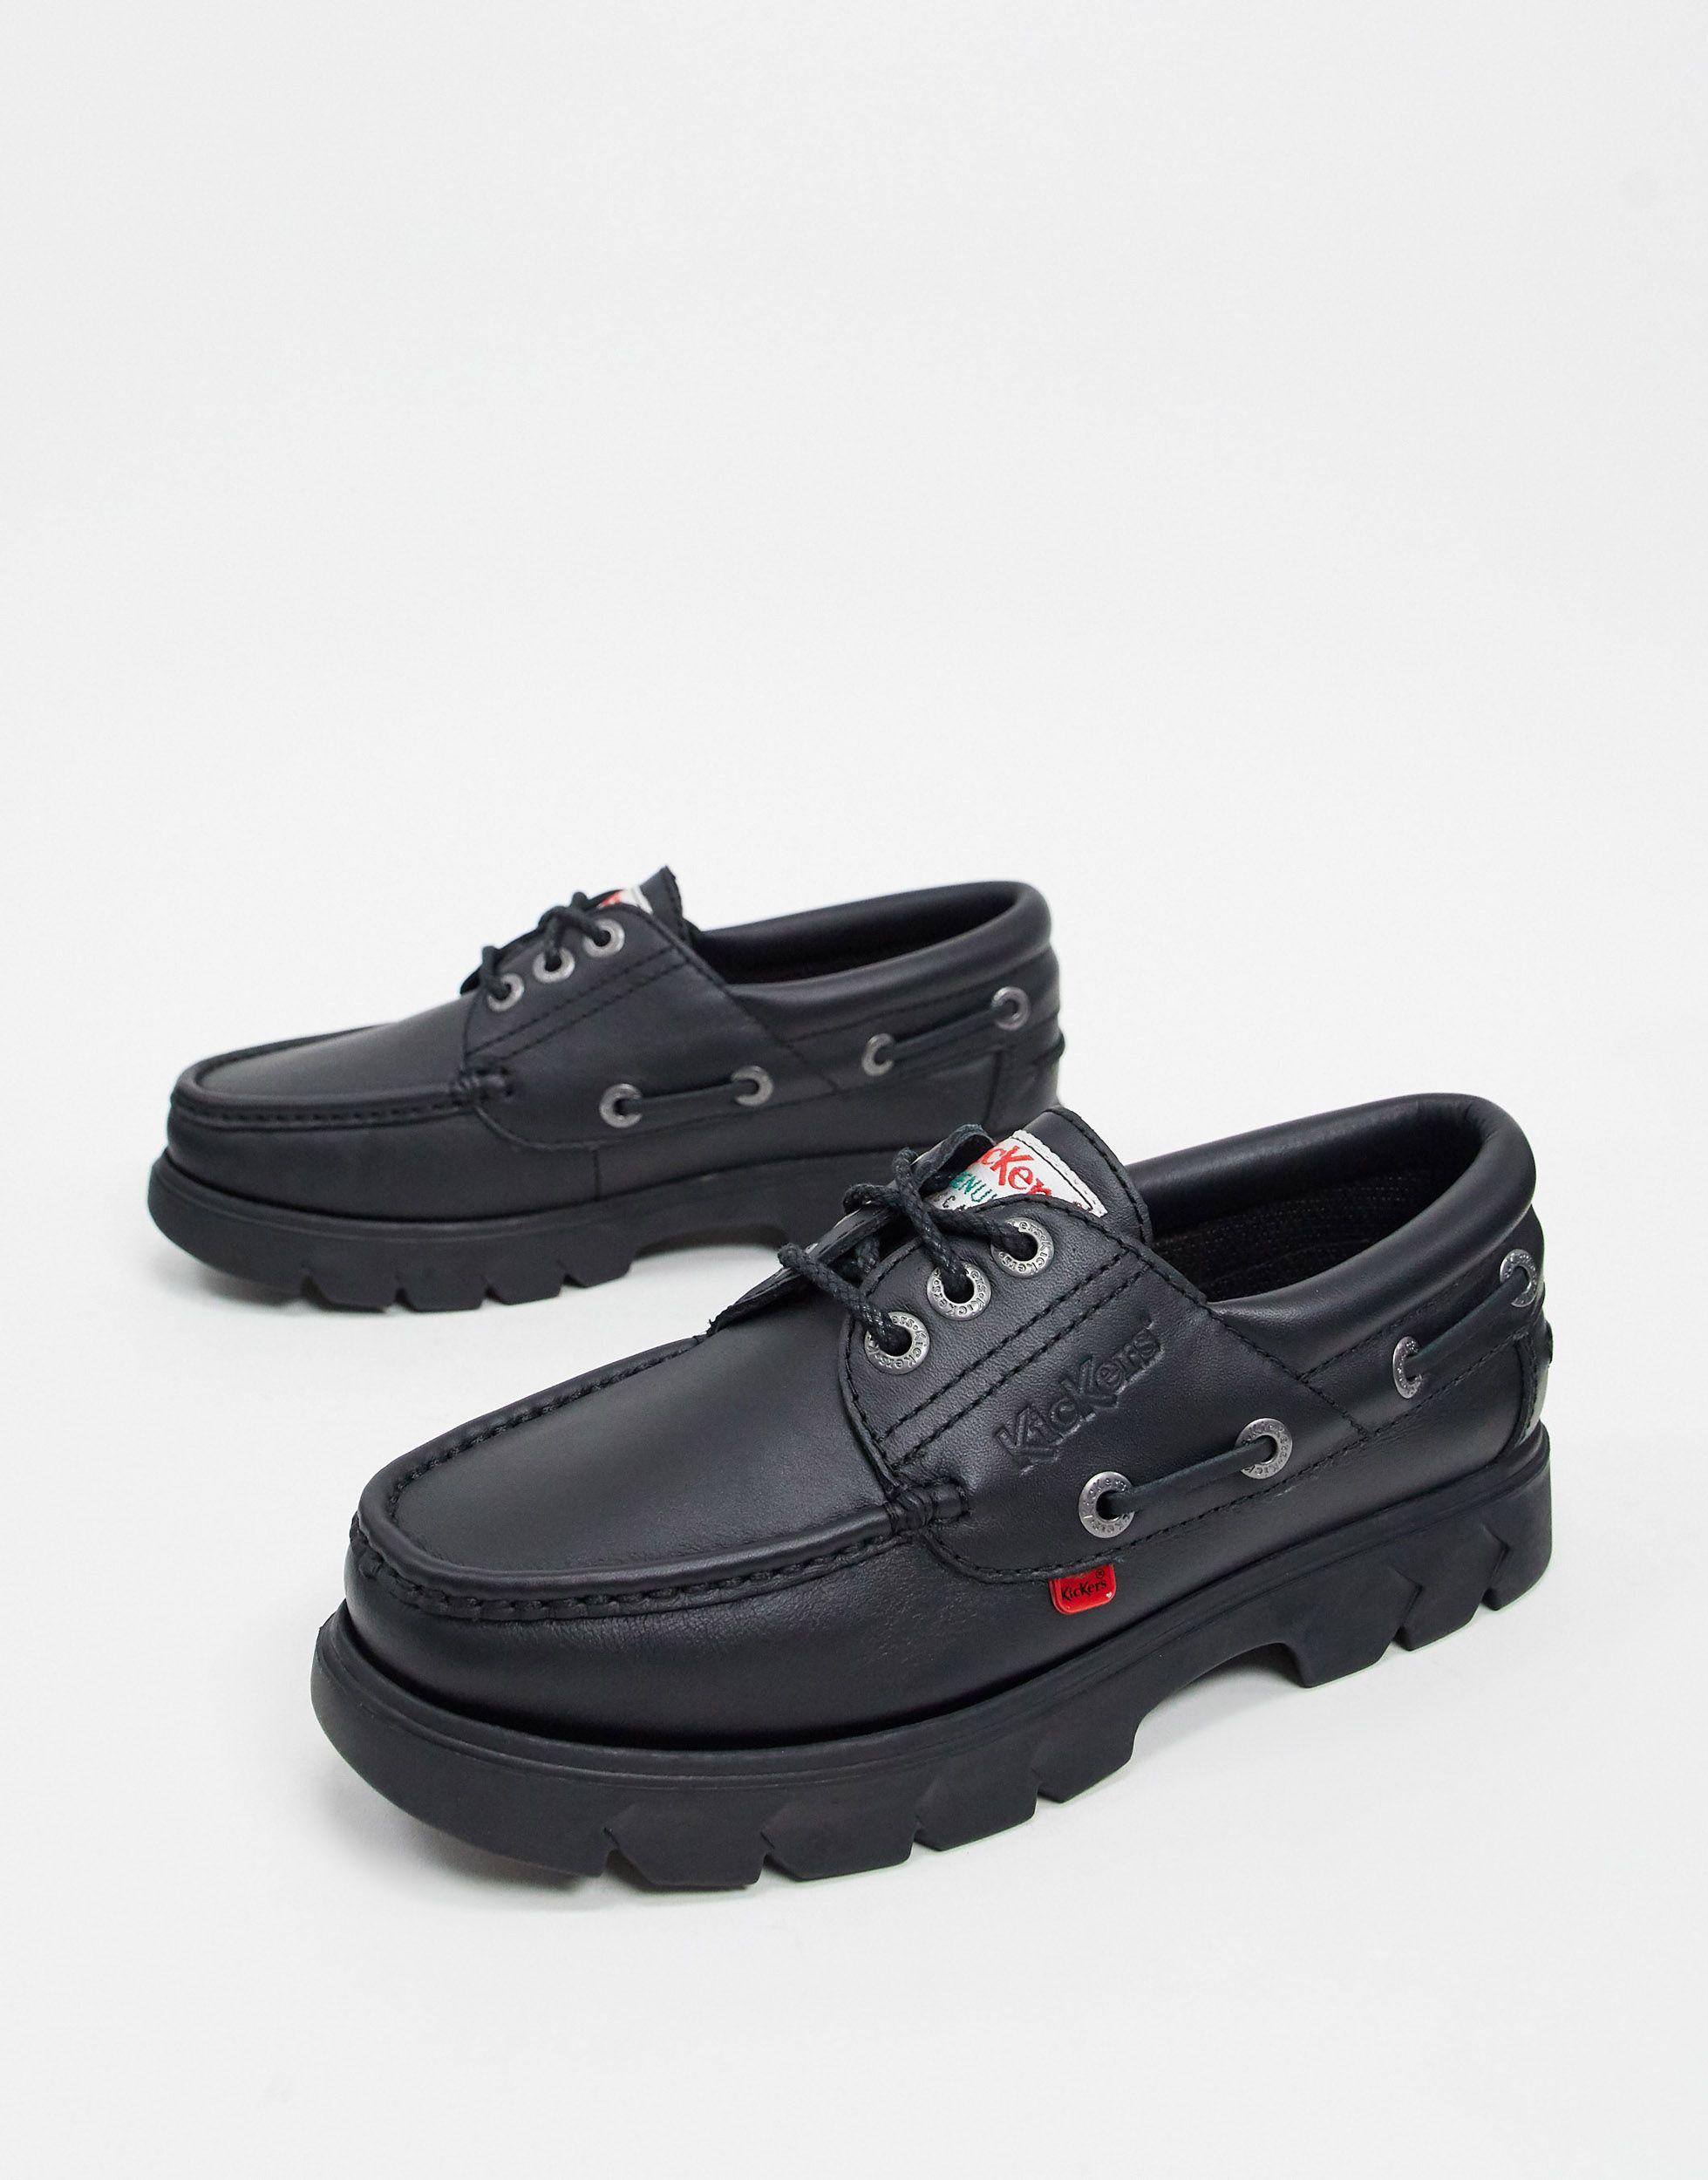 Kickers Leather Lennon Boat Shoes in 